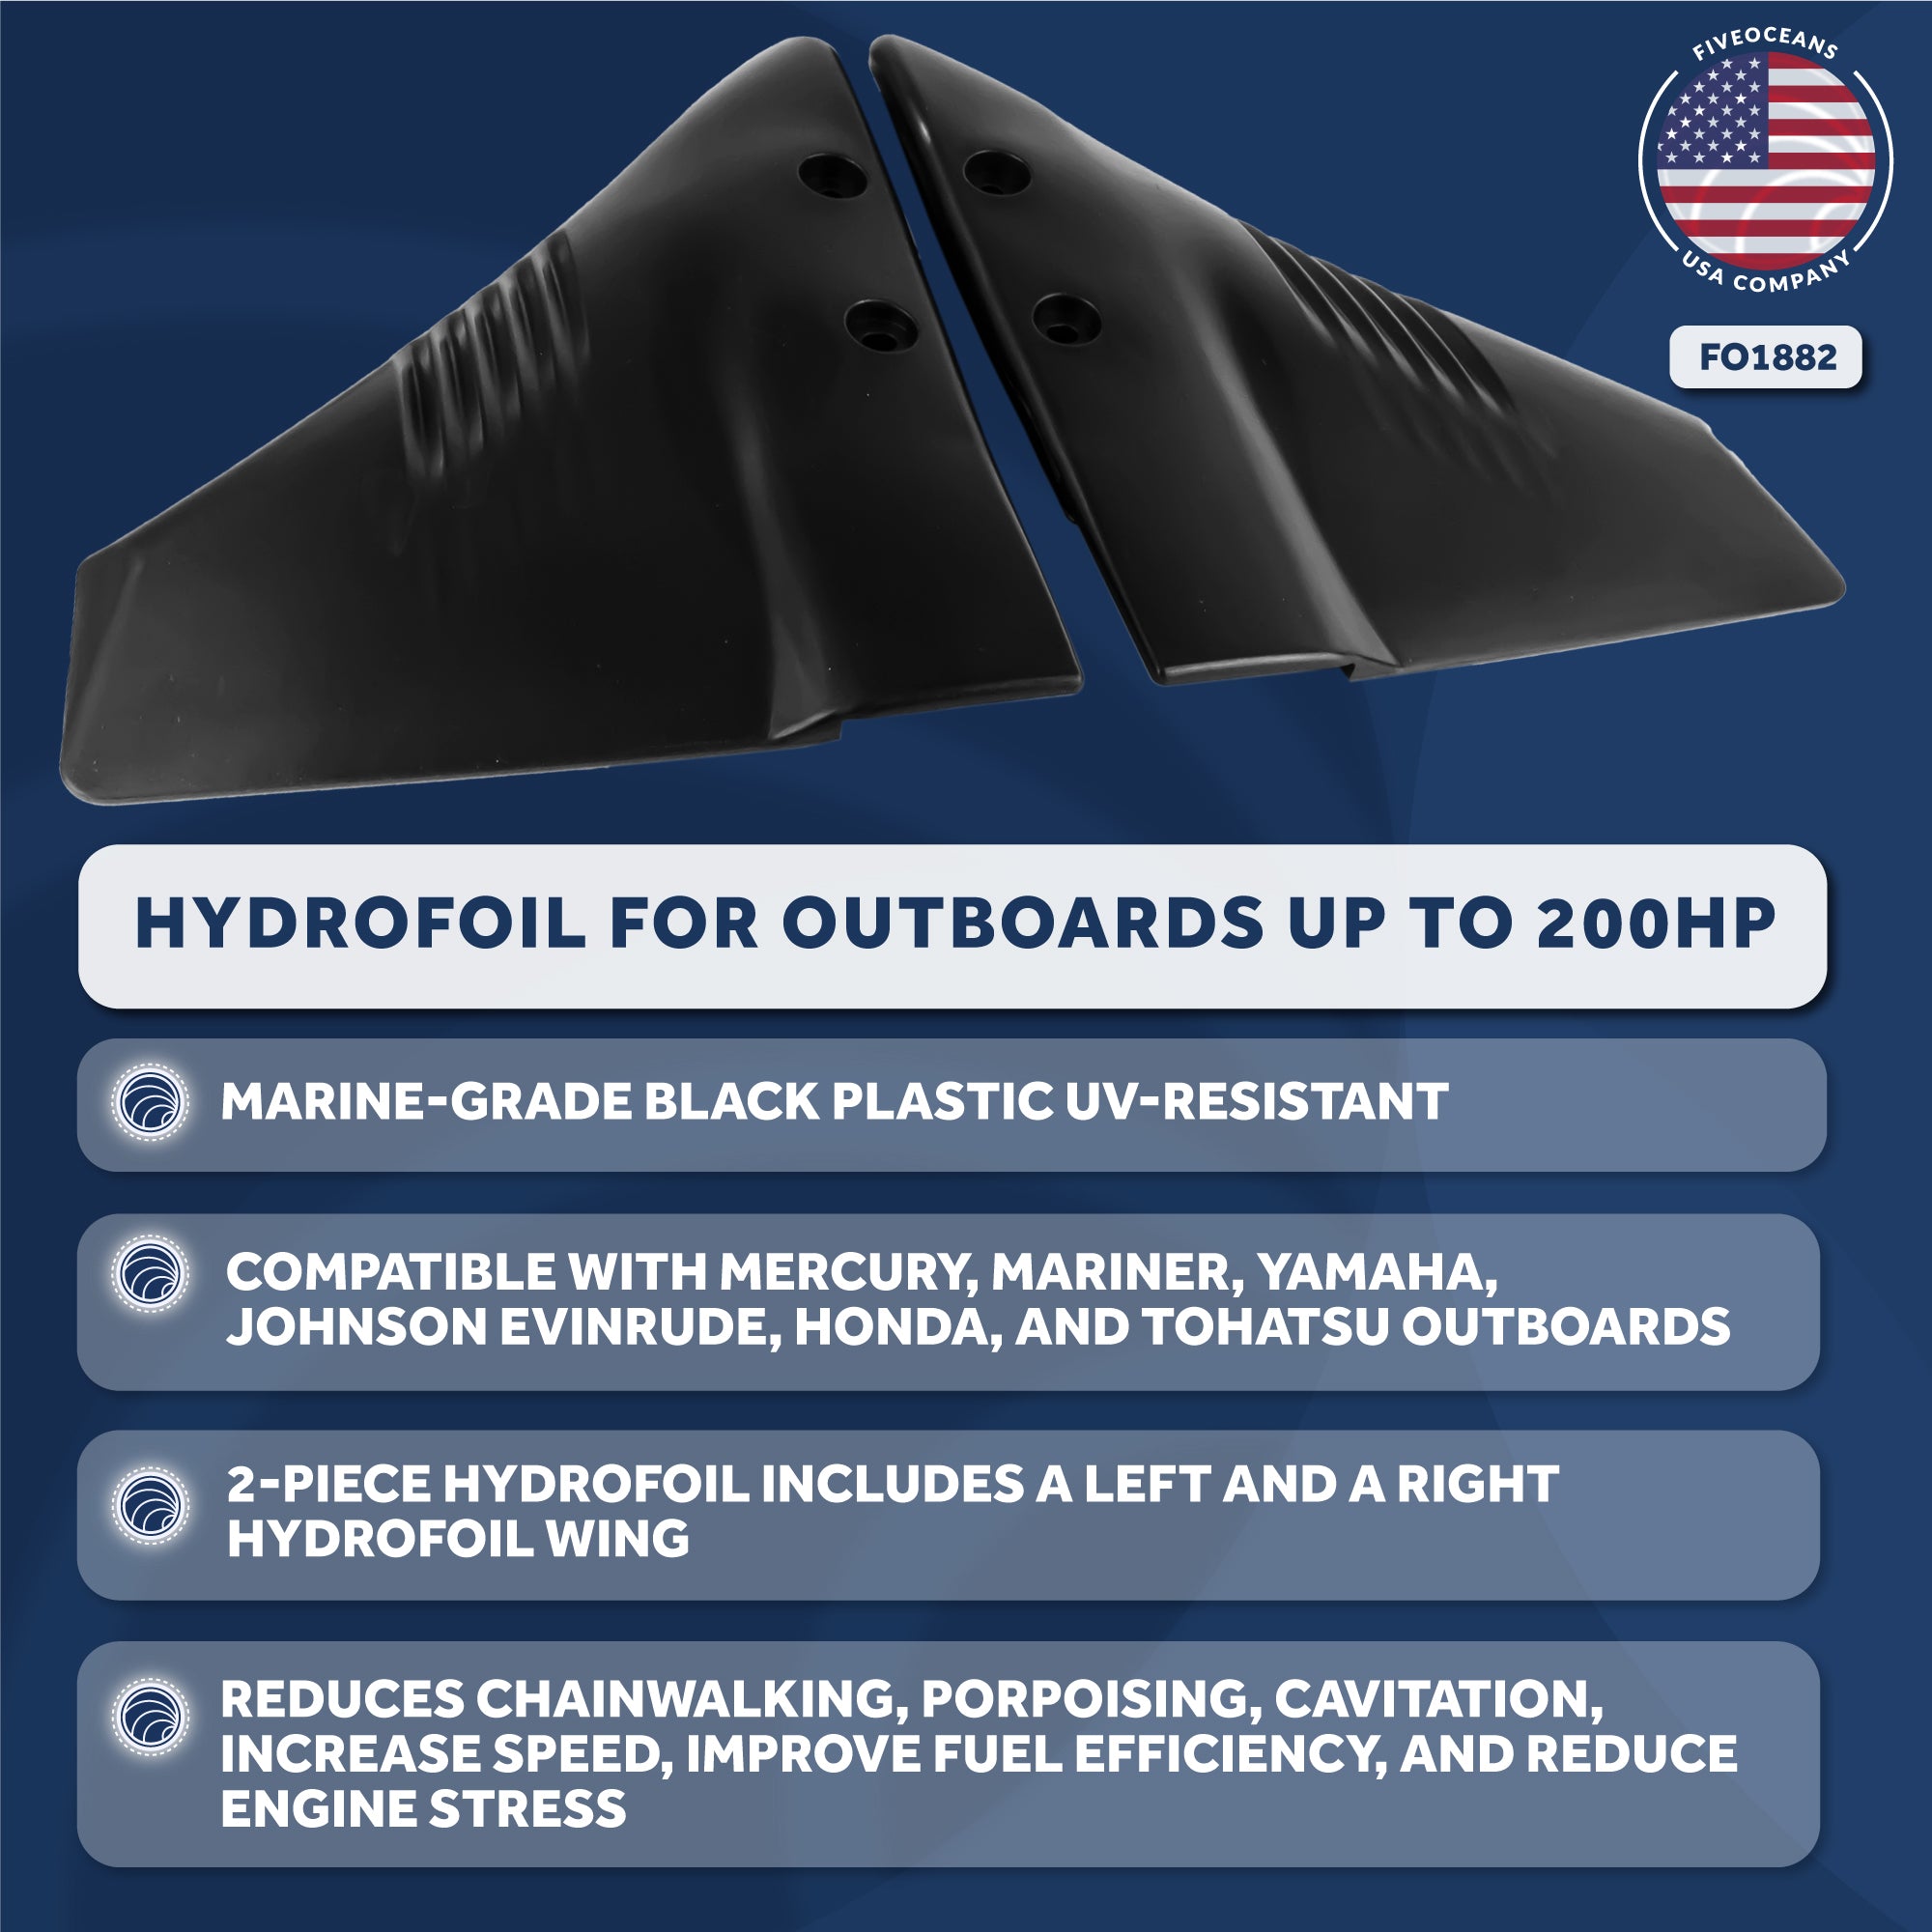 Hydrofoil for Outboards Up to 200HP, Hydro-Stabilizer, Black - FO1882